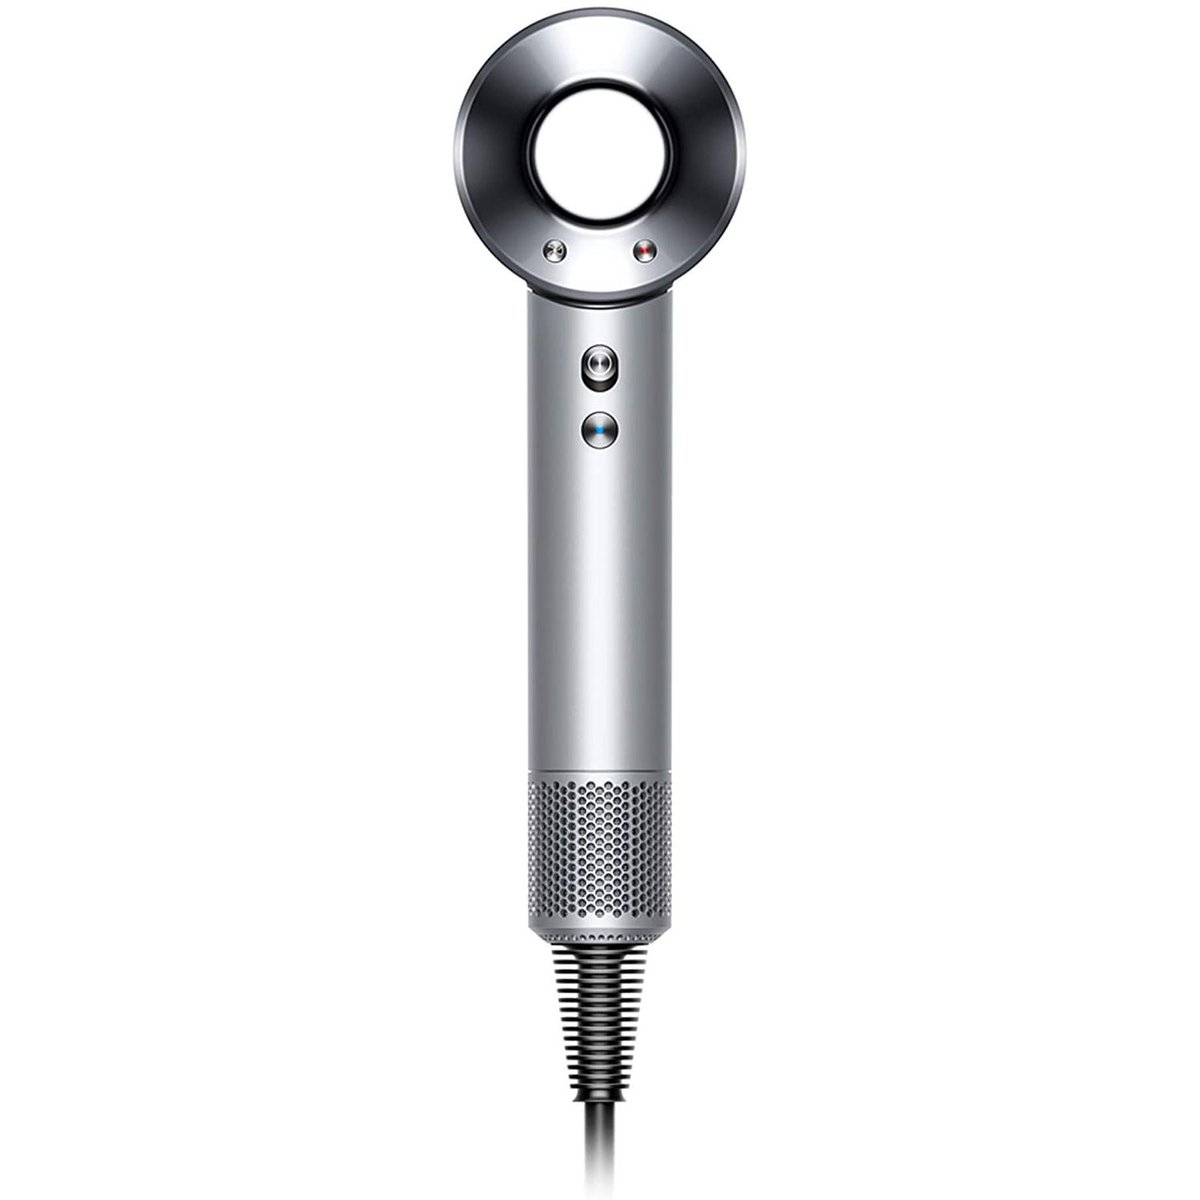 Dyson Supersonic Hair Dryer Refurbished $199 at Dailysale